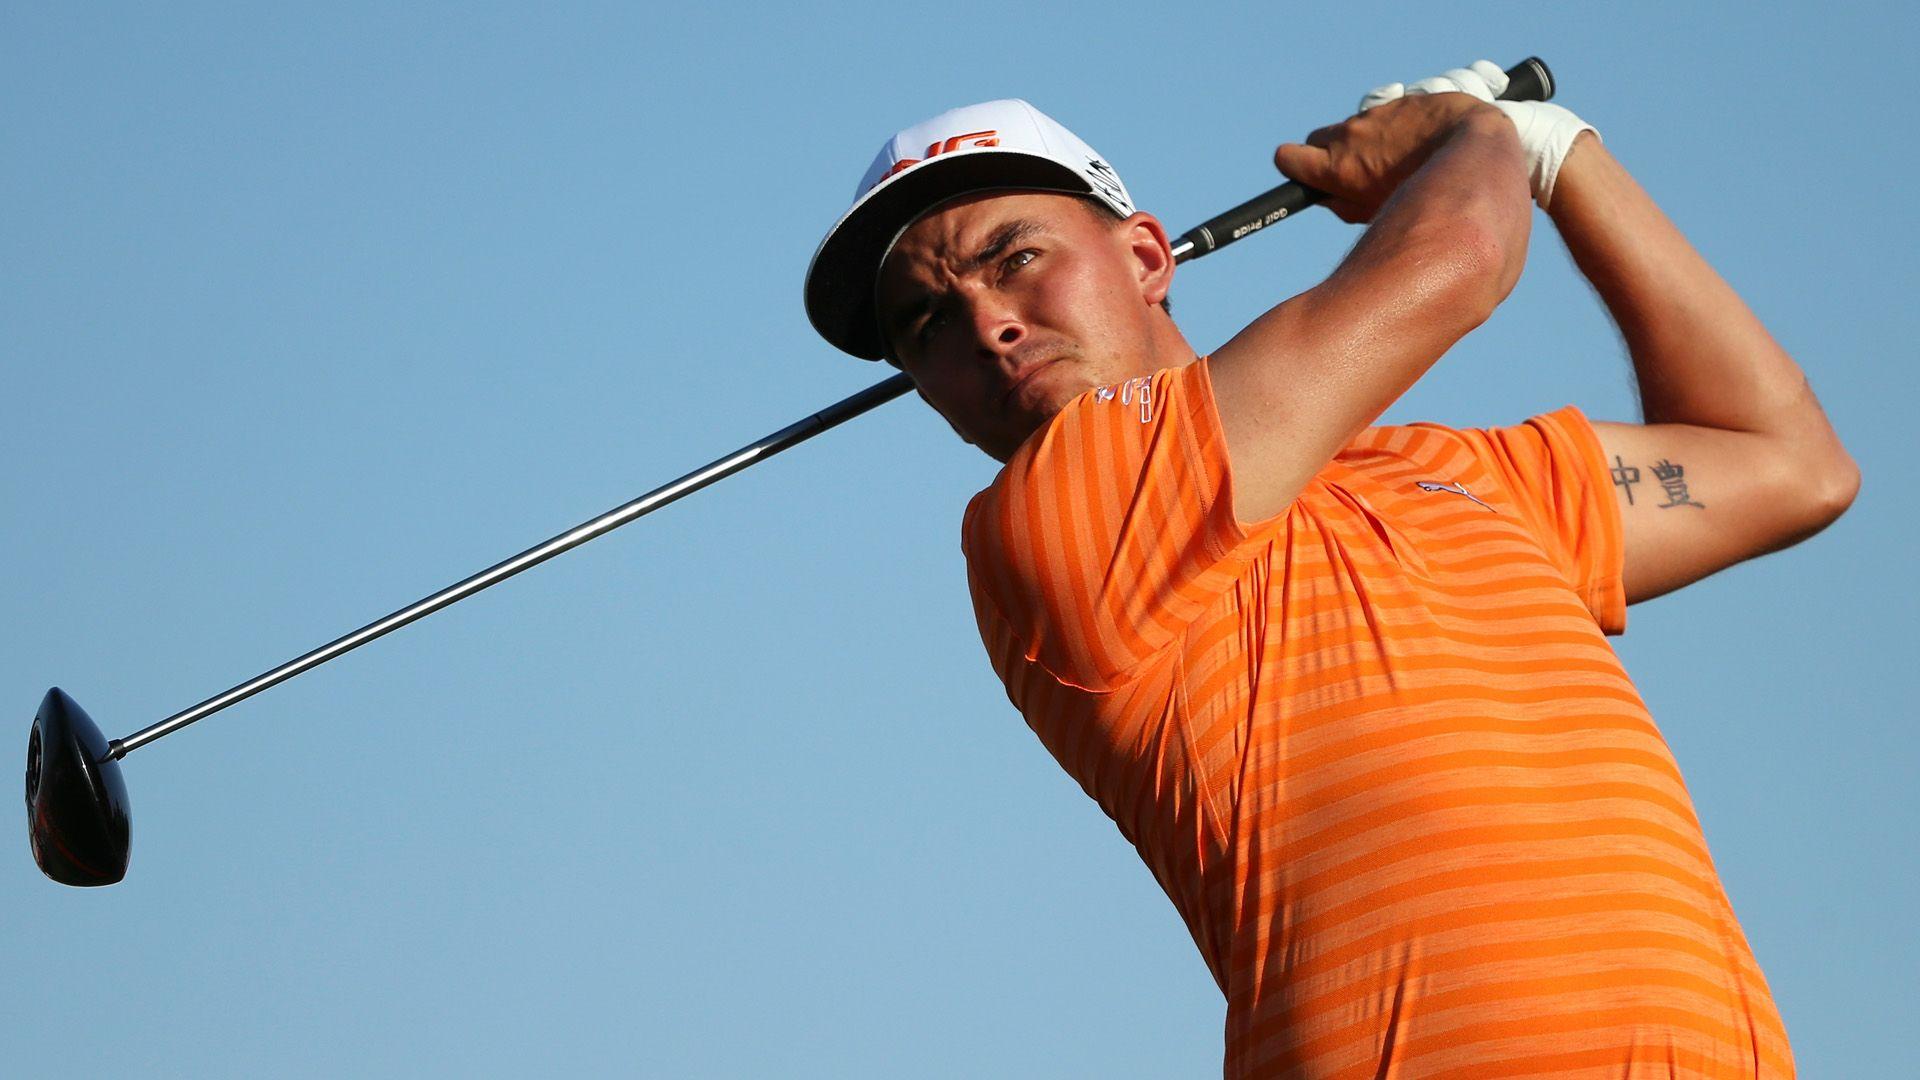 Rickie Fowler answers overrated jibe with Players Championship